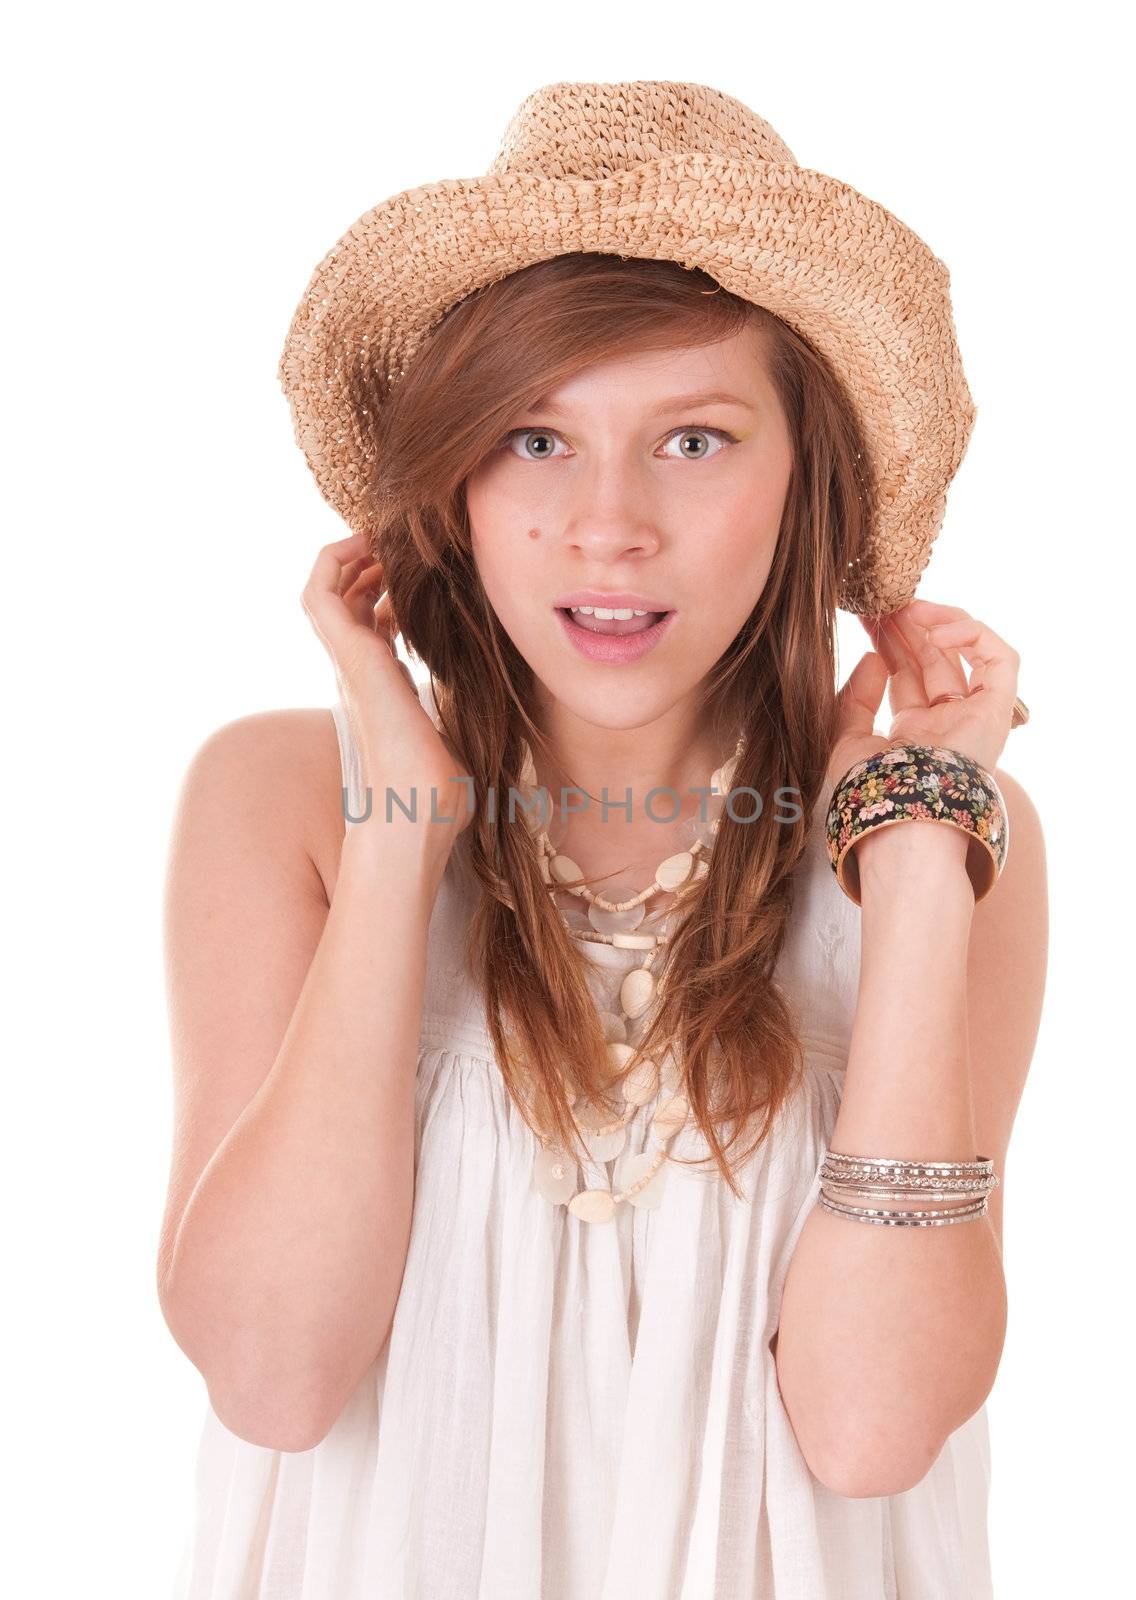 Smiling girl in Straw hat portrait isolated on white background